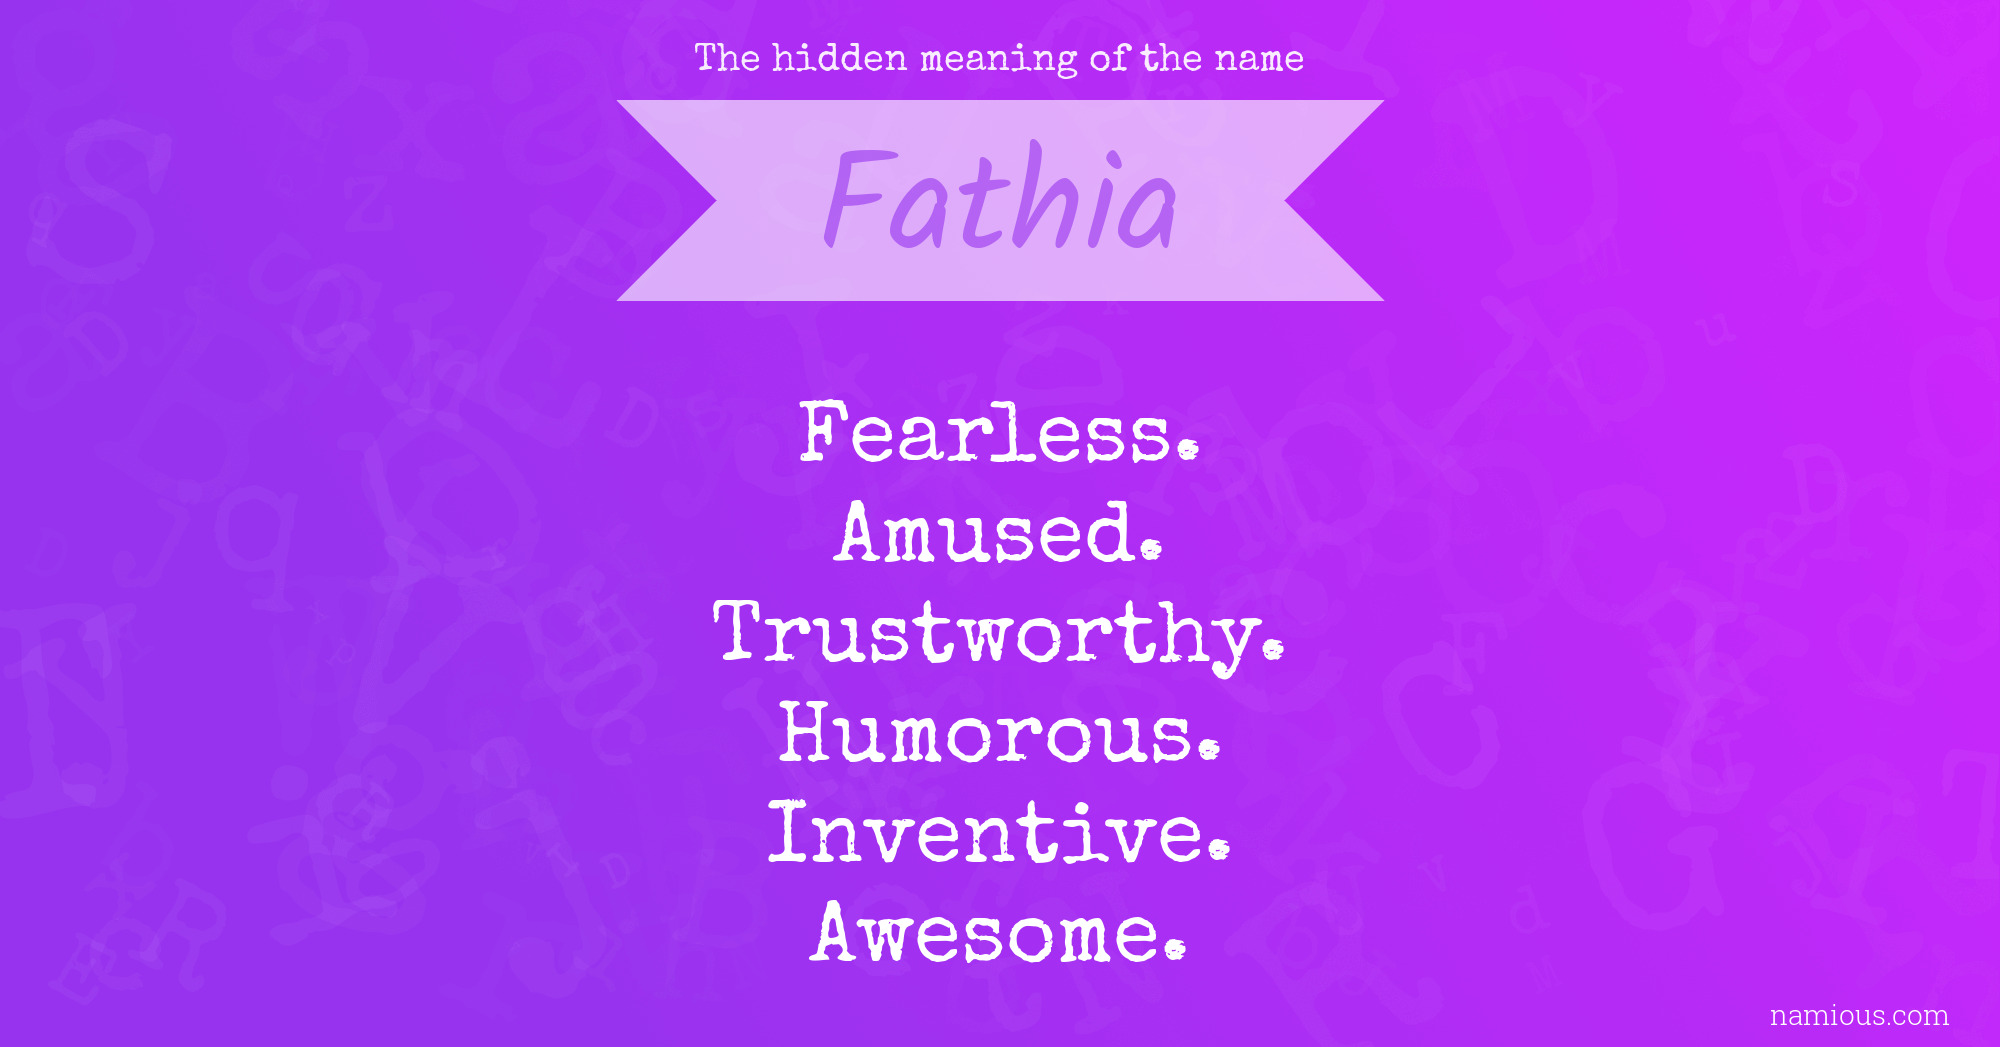 The hidden meaning of the name Fathia